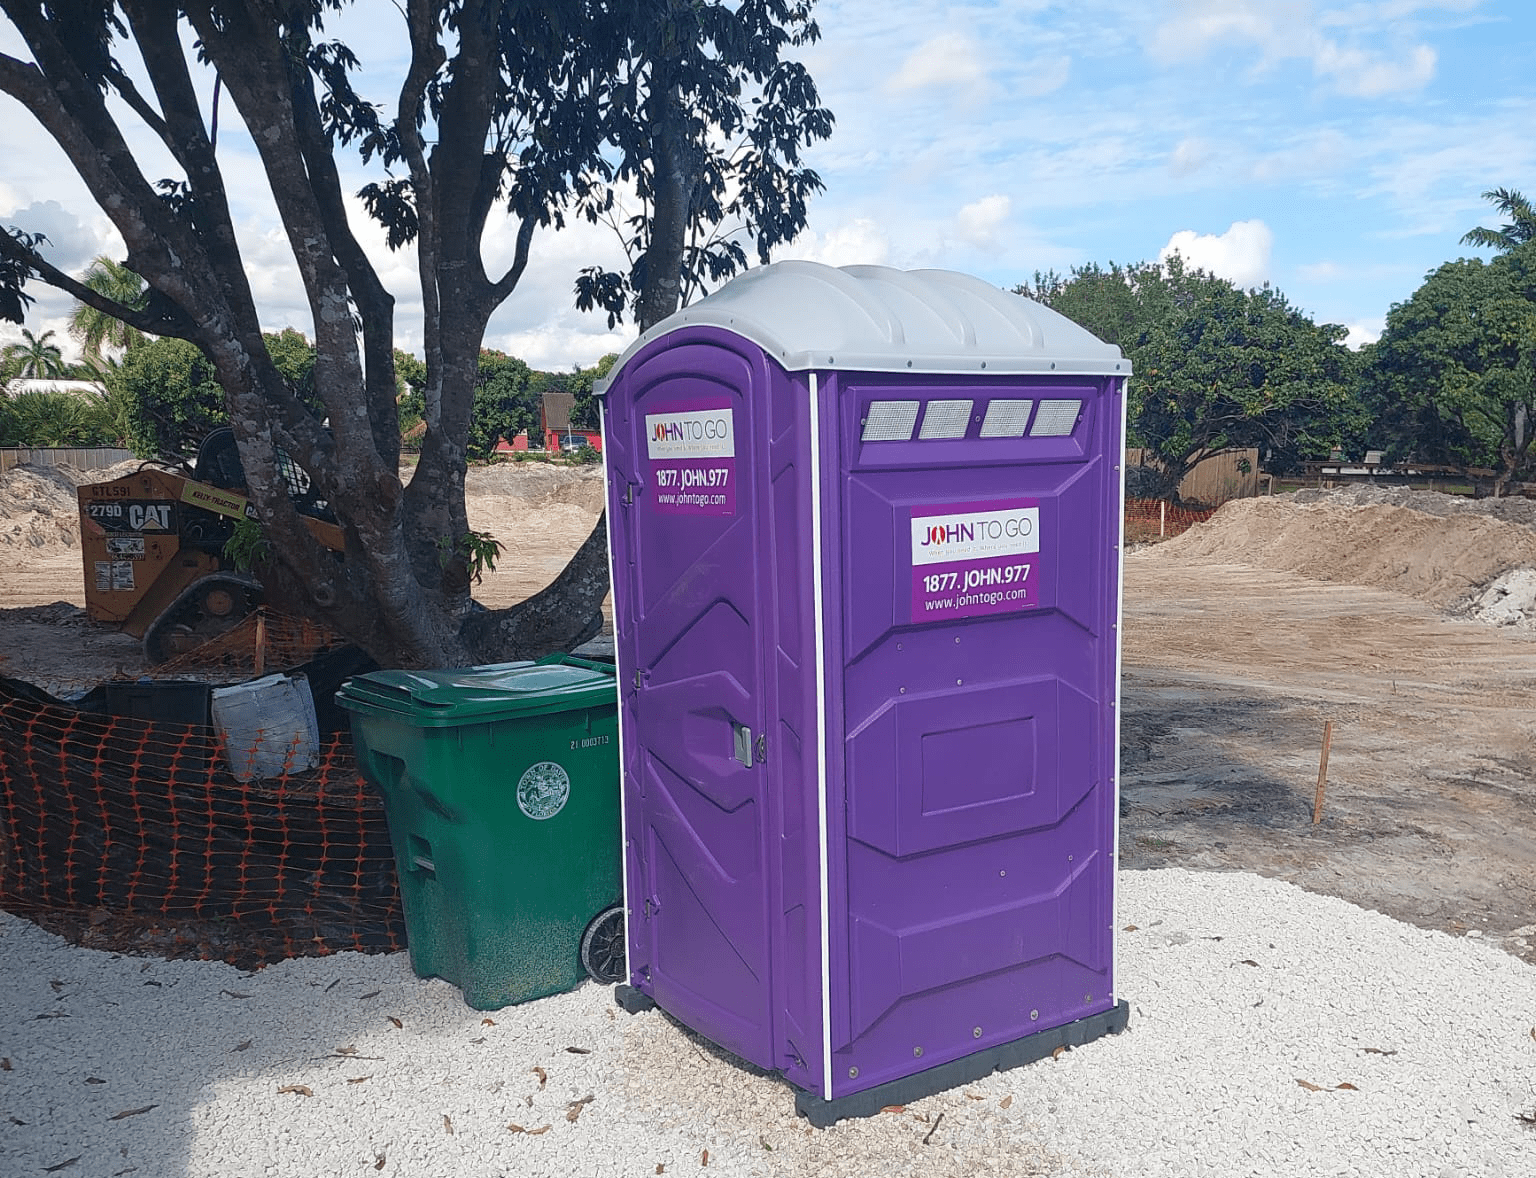 Porta potty rental near Garden City for workers and guests